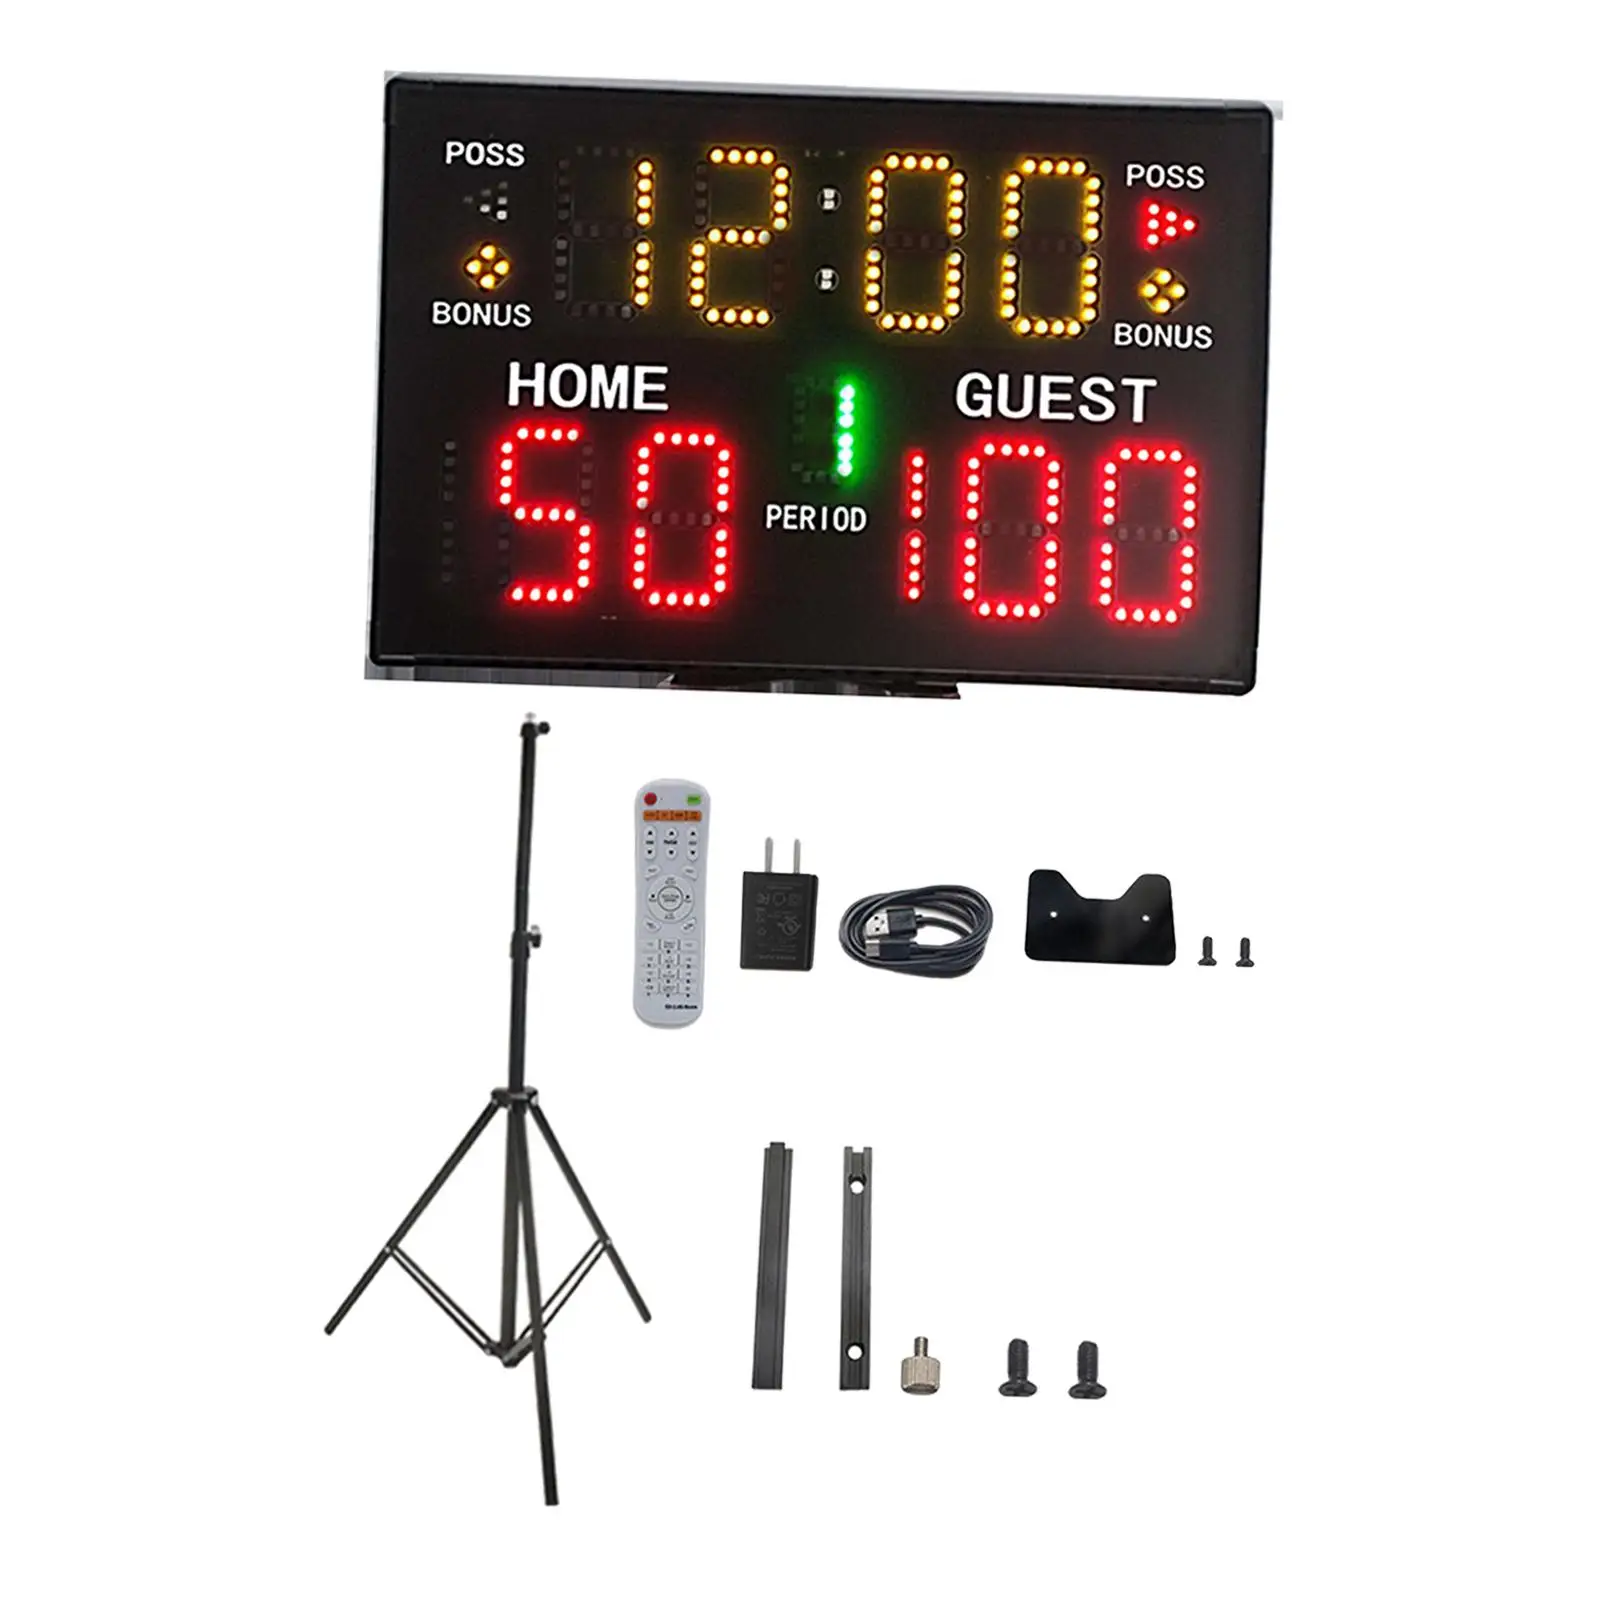 Portable Digital Scoreboard Score Clock Tripod Mount LED Display 98ft Control Distance for Tennis Boxing Indoor Volleyball